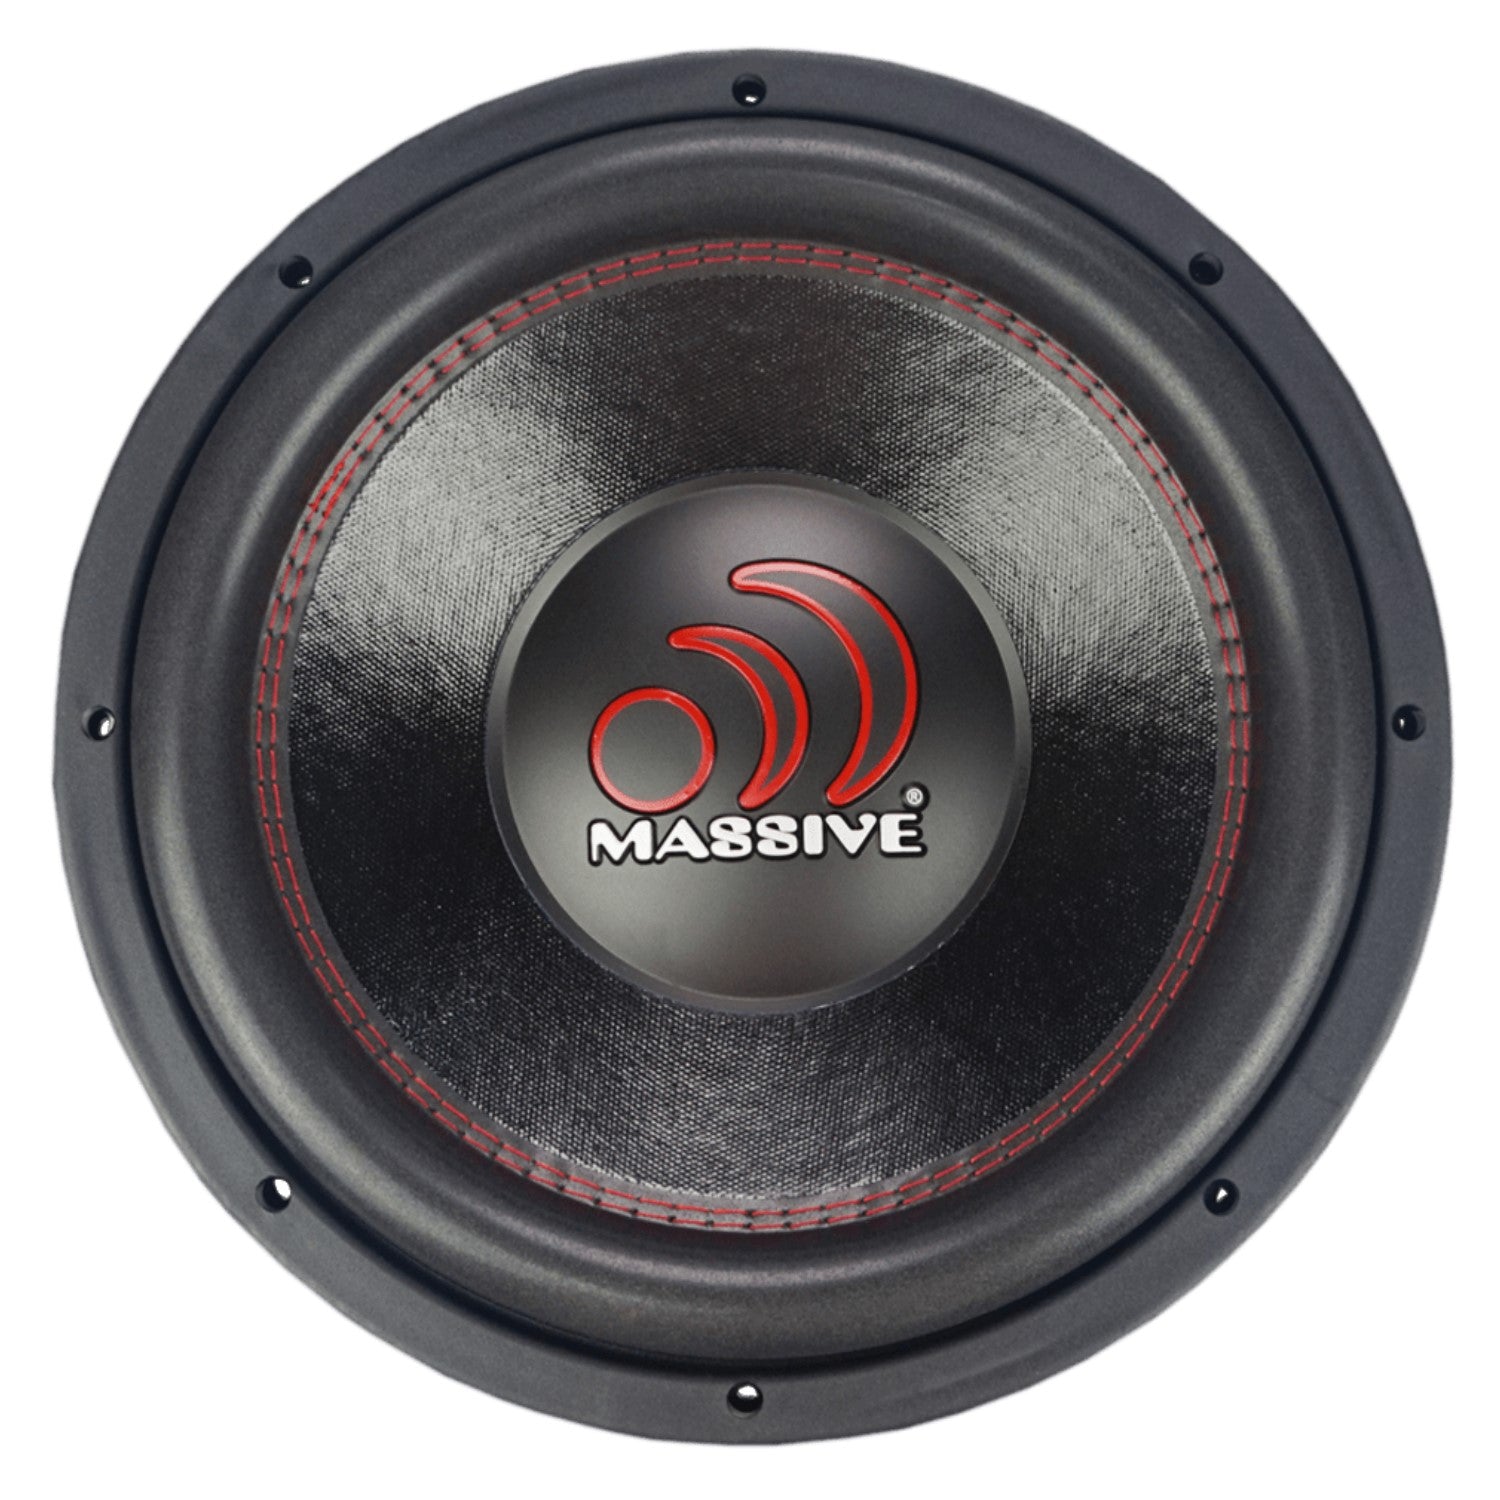 GTX124 - 12" 700 Watts RMS Dual 4 Ohm Subwoofer